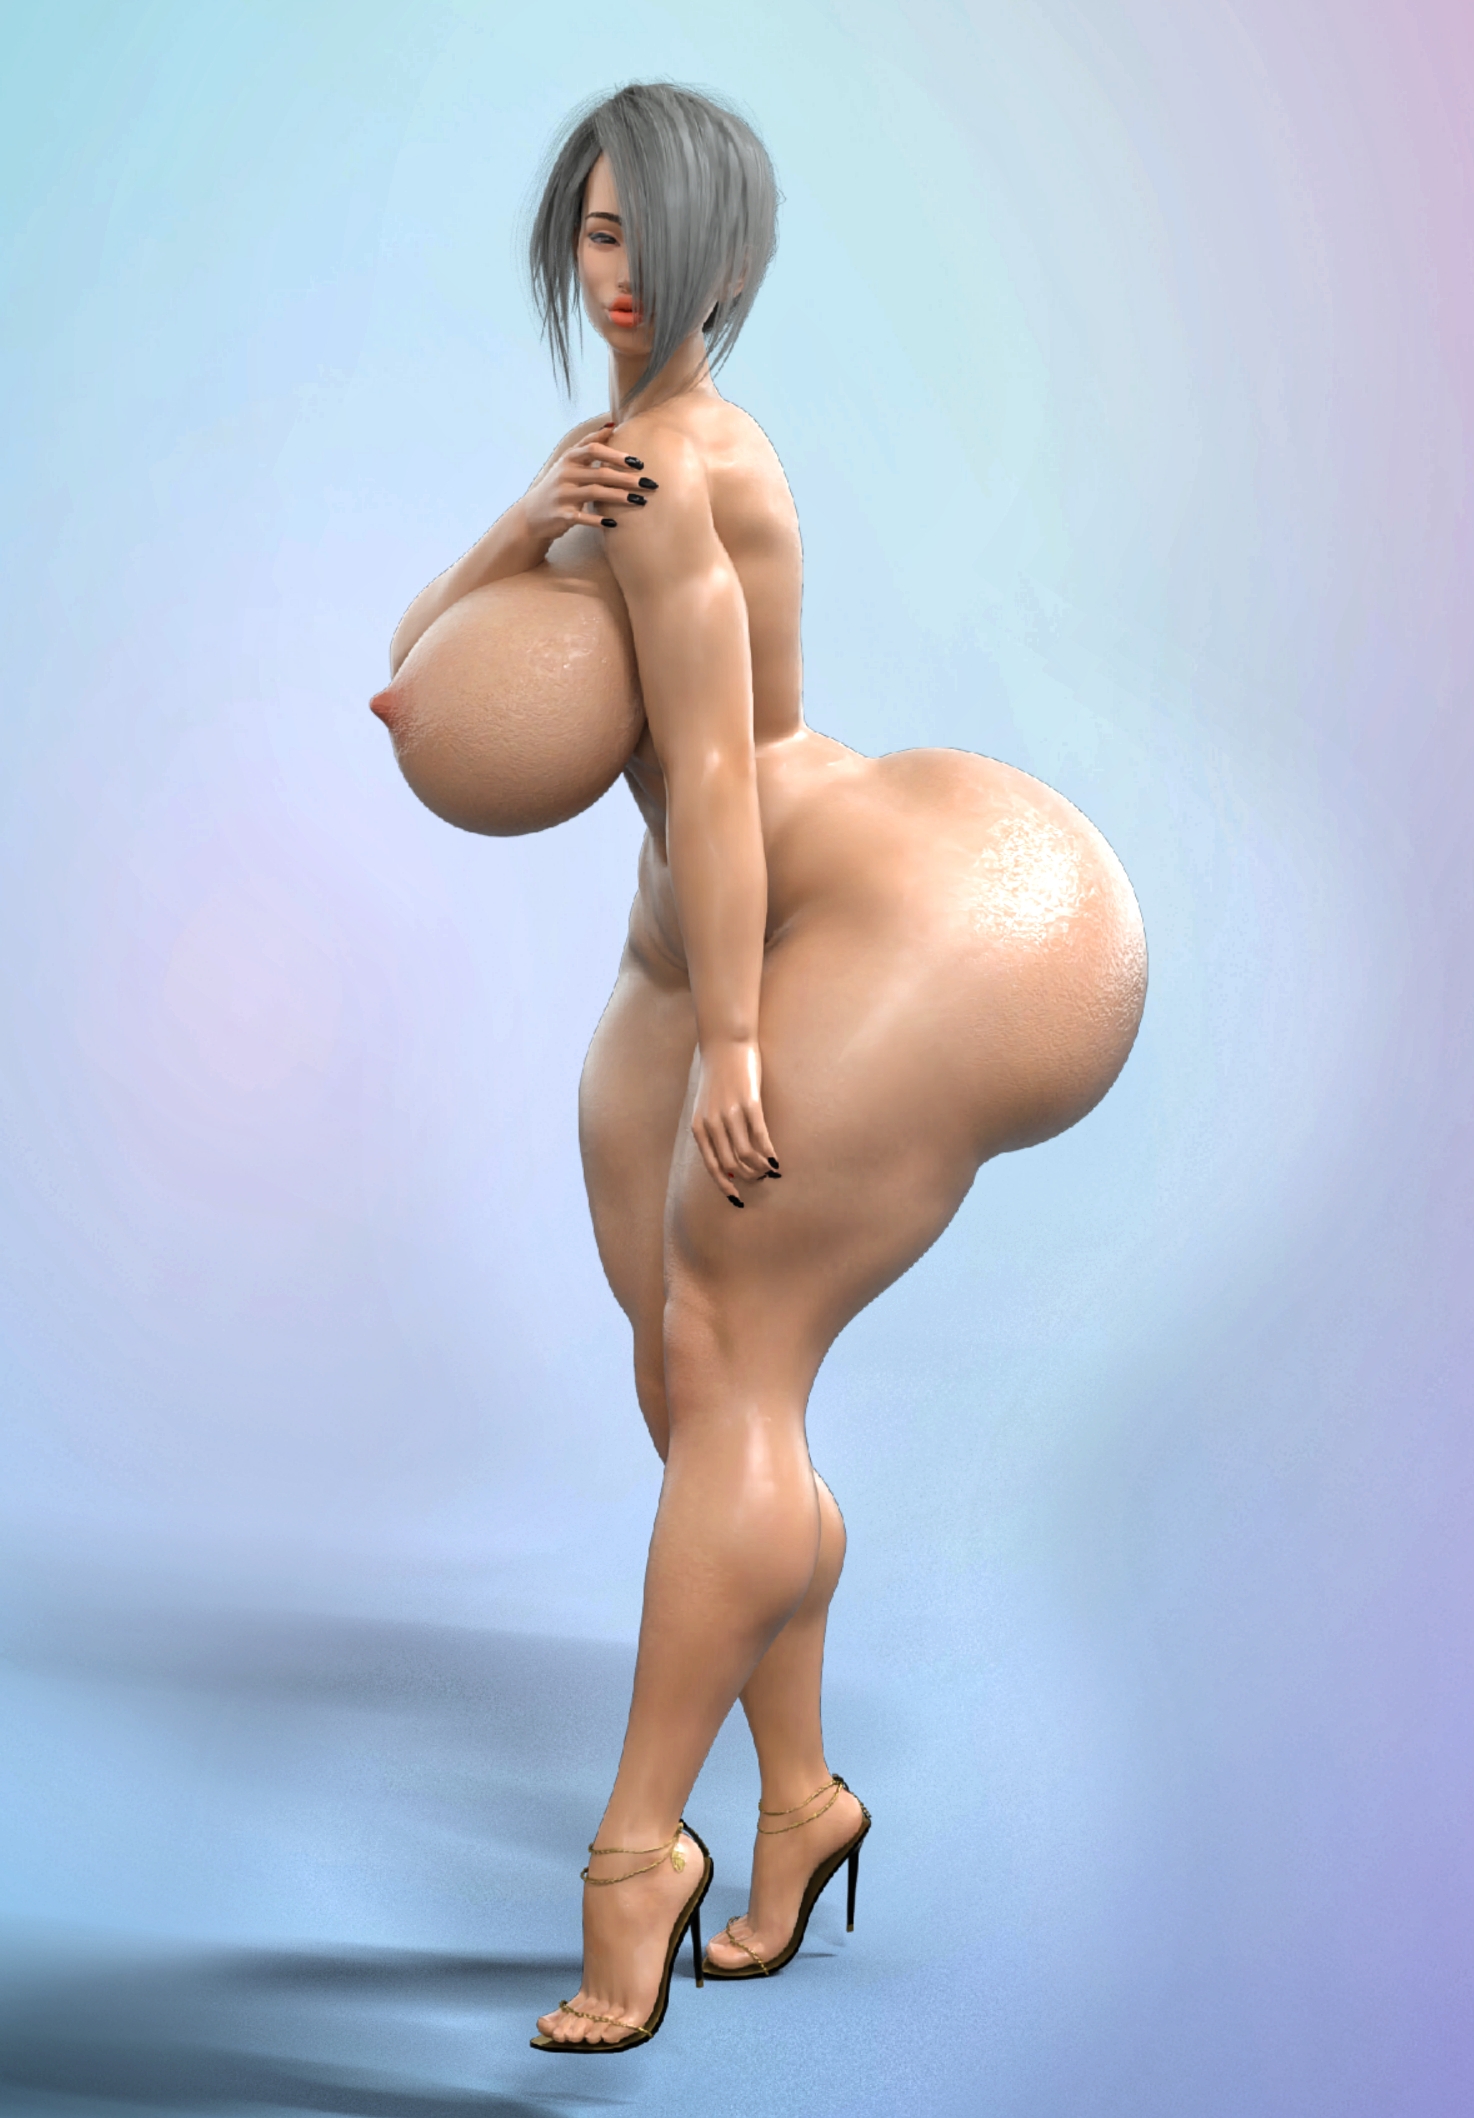 MOMMY PHOTOSHOOT Prison House Big Tits Big Ass Mom 3d Porn Thicc Thick Thighs Bimbo Sexy Woman Sexy Boobs Horny Face Nsfw 3d Girl